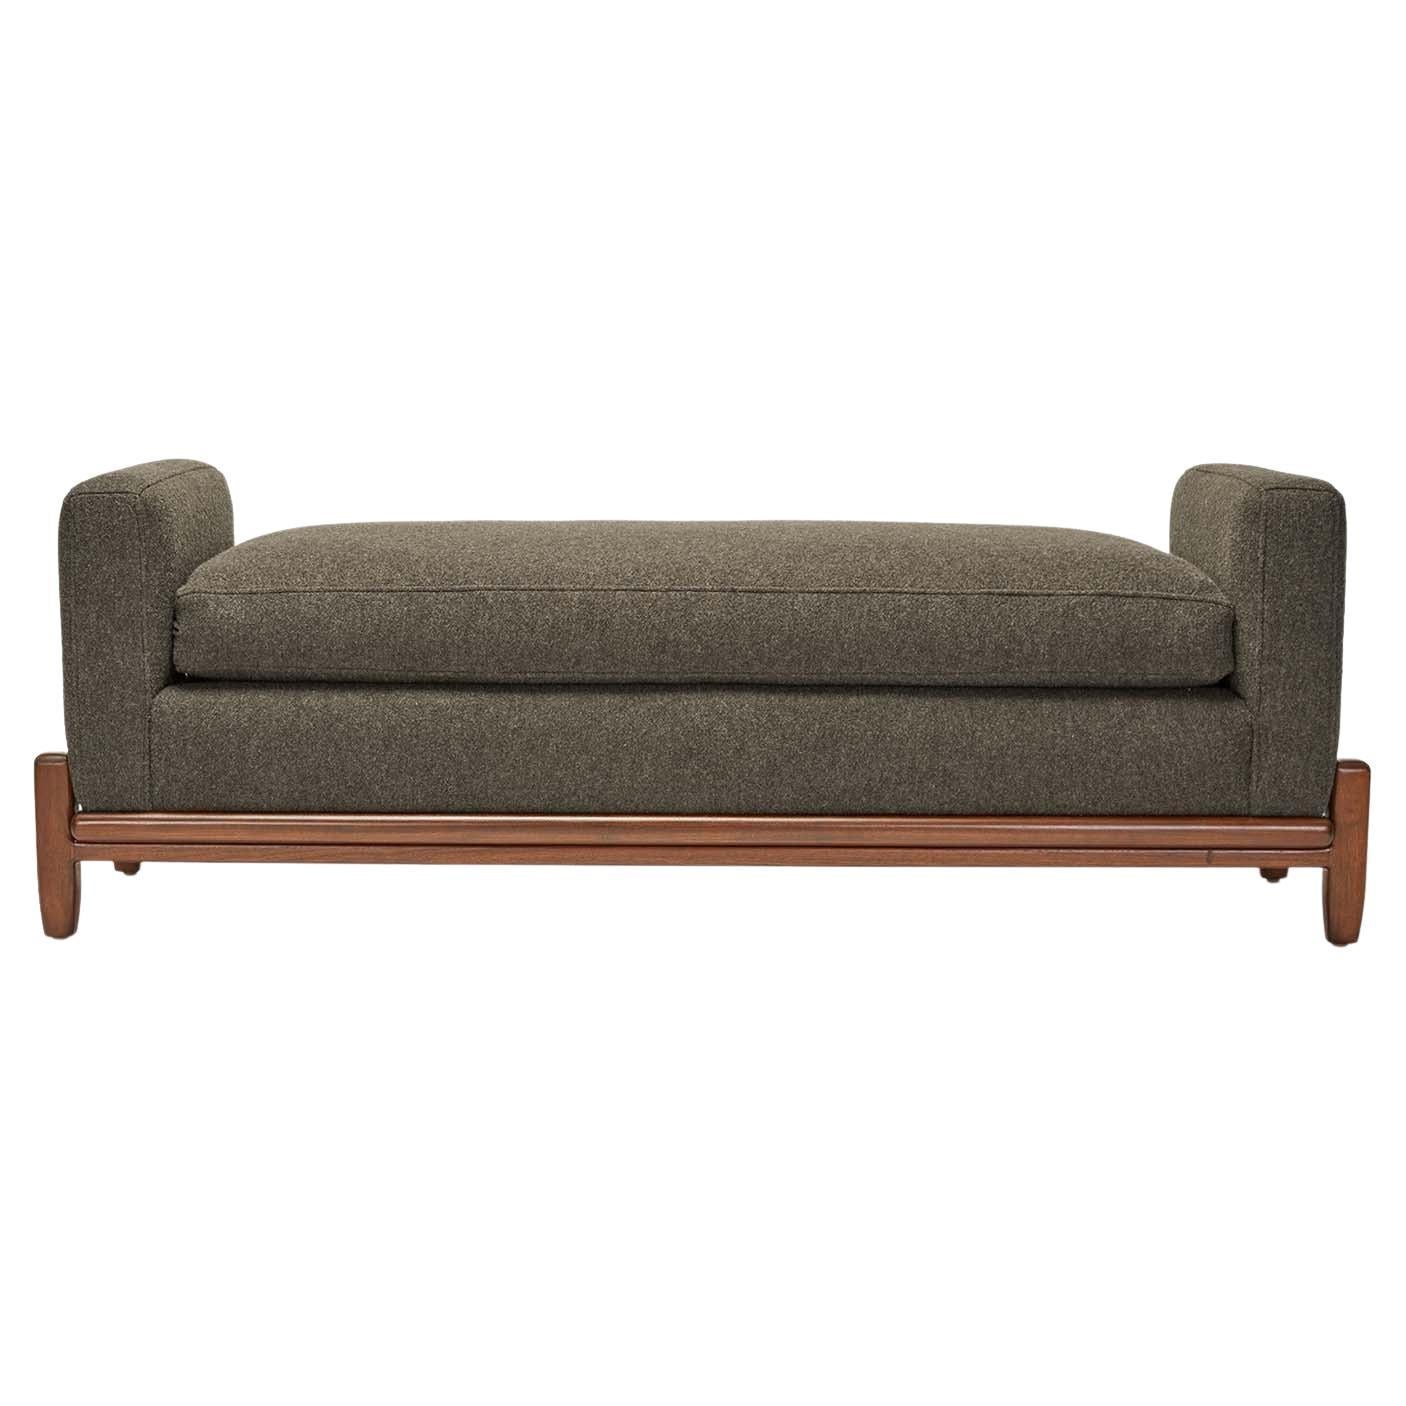 George Bench by Brian Paquette for Lawson-Fenning For Sale